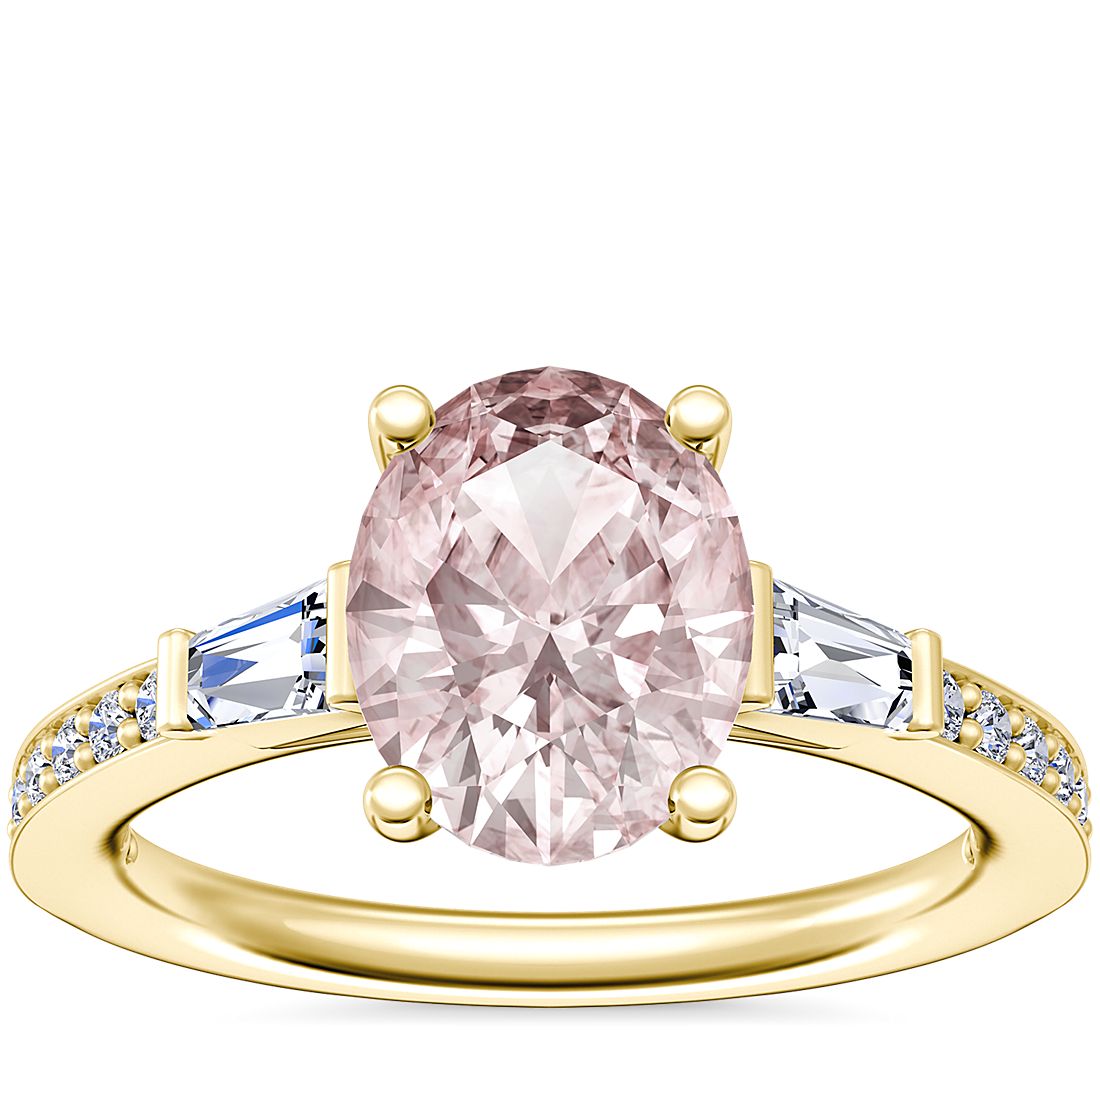 Tapered Baguette Diamond Cathedral Engagement Ring with Oval Morganite in 14k Yellow Gold (9x7mm)